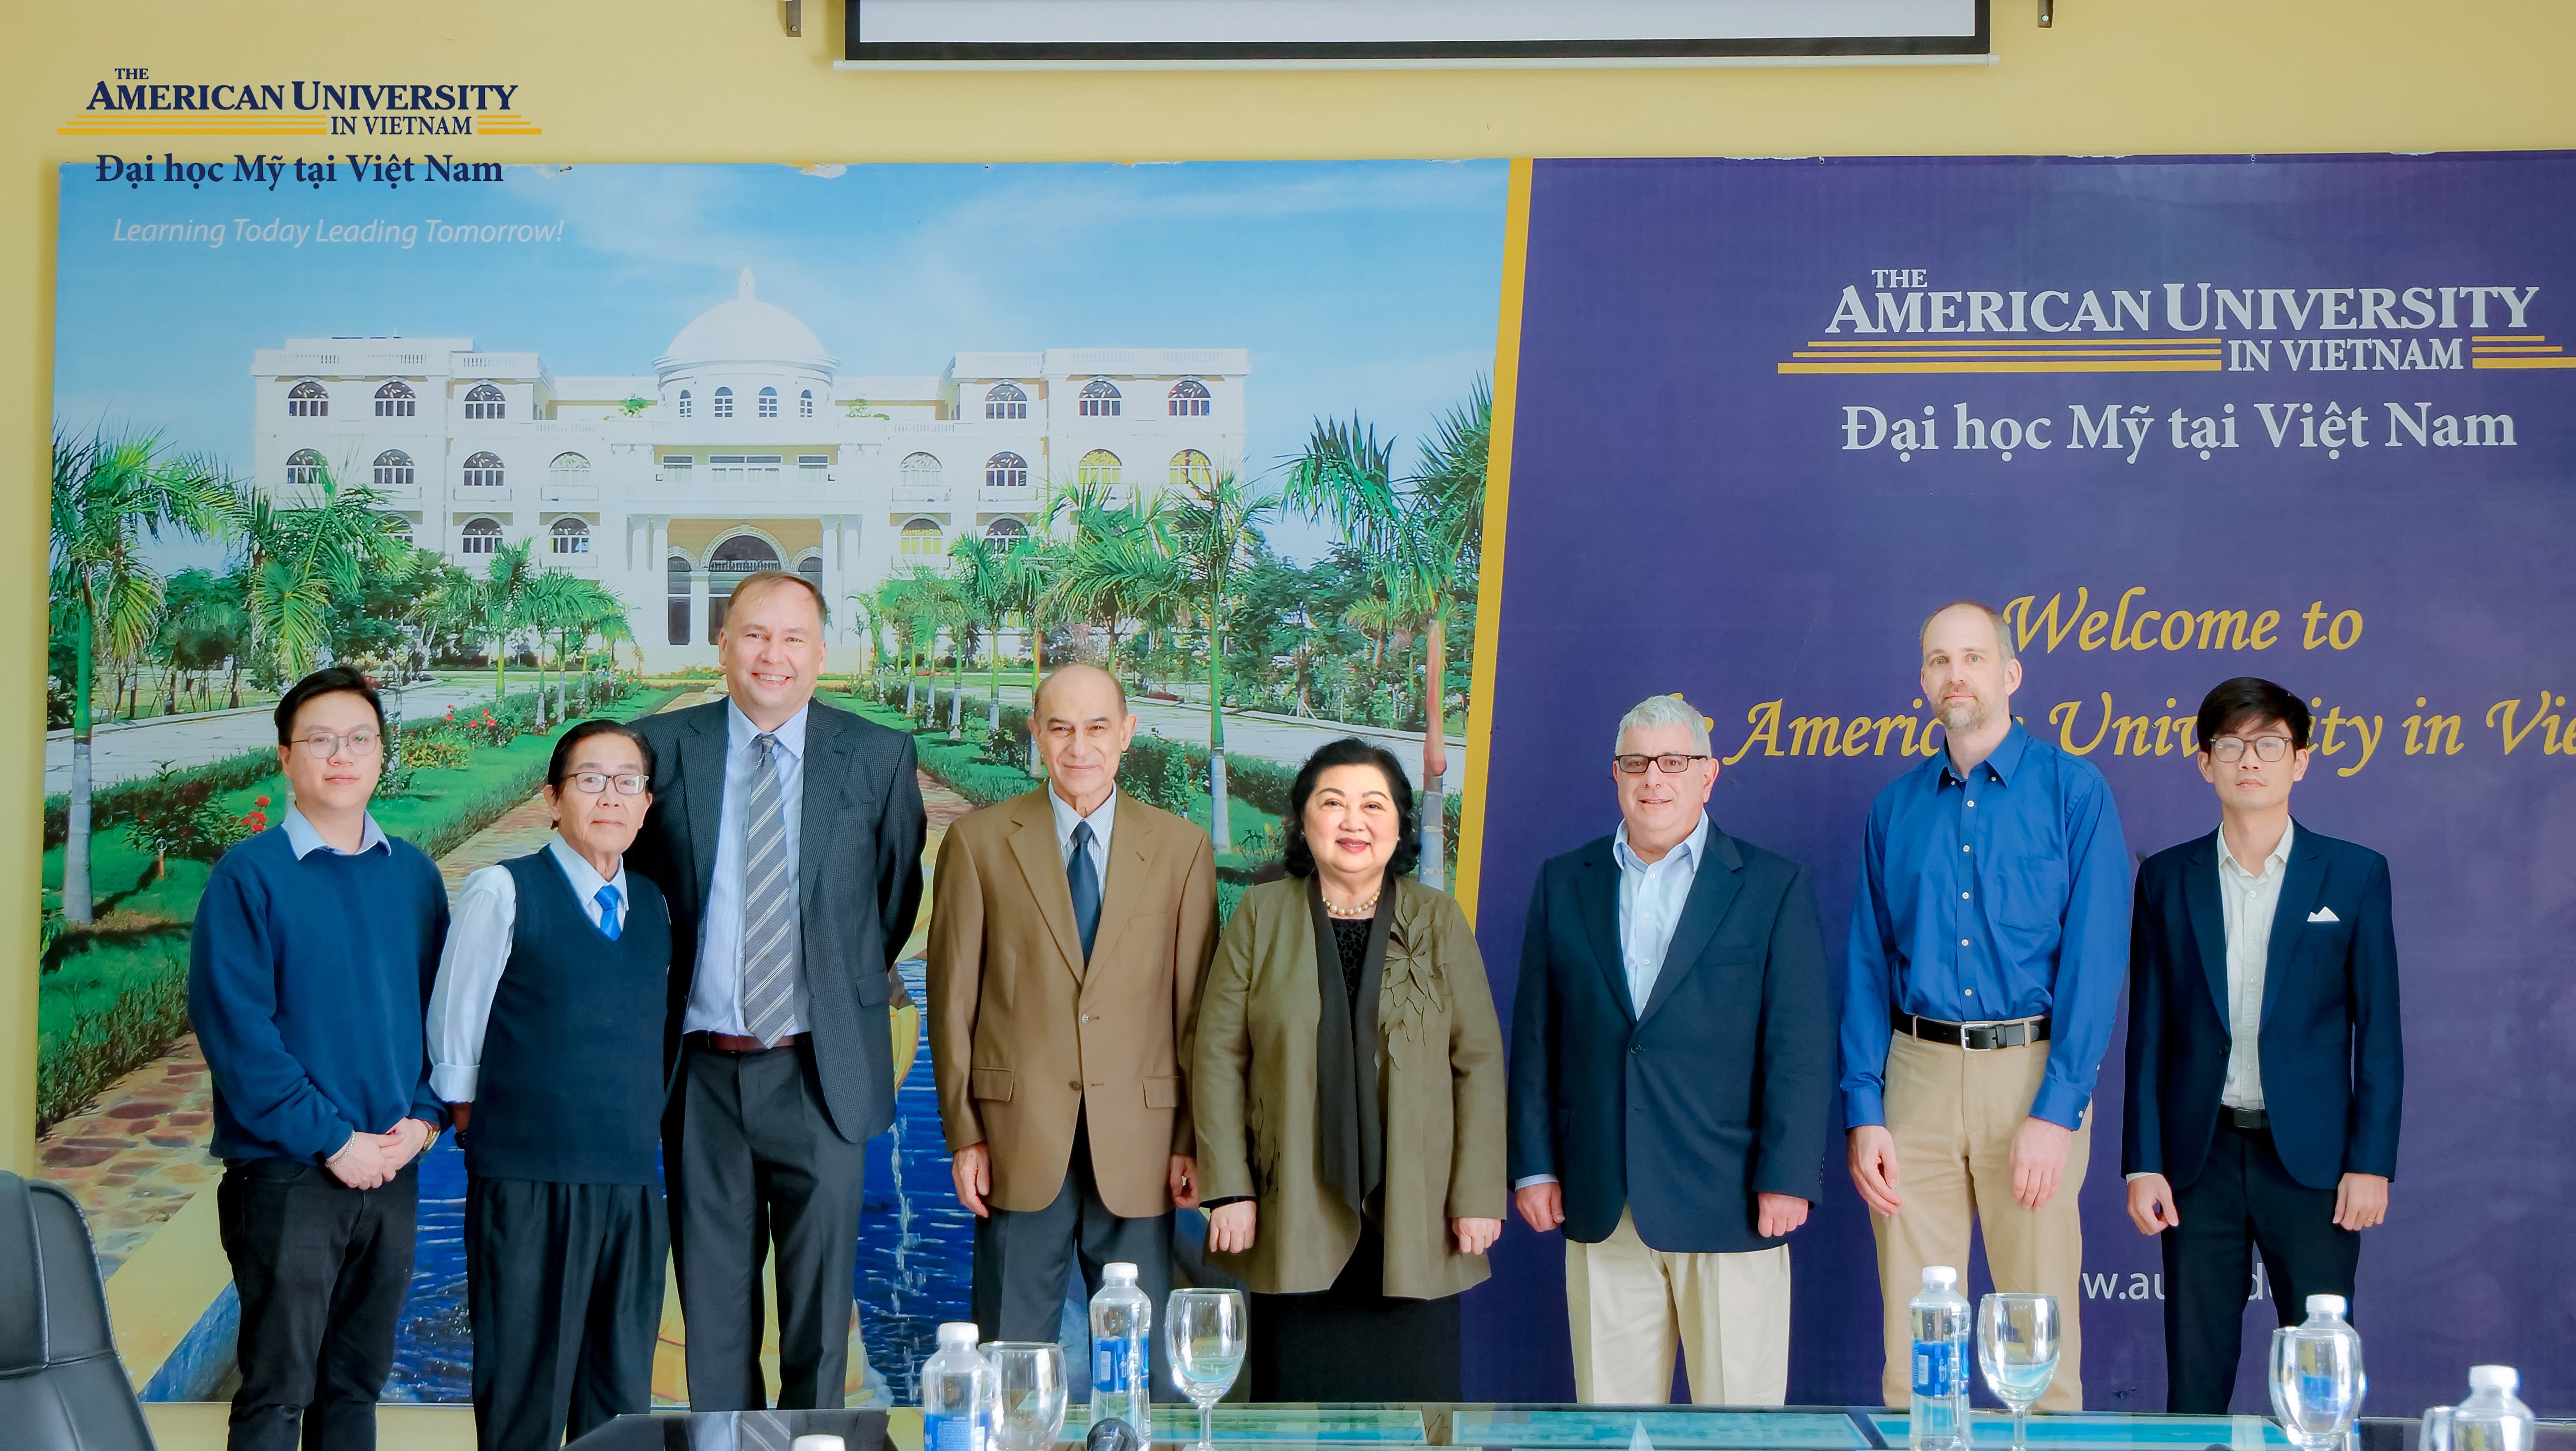 THE AMERICAN UNIVERSITY IN VIETNAM AUV - THE BRIDGE BETWEEN THE UNITED STATES-VIETNAM EDUCATION COOPERATION